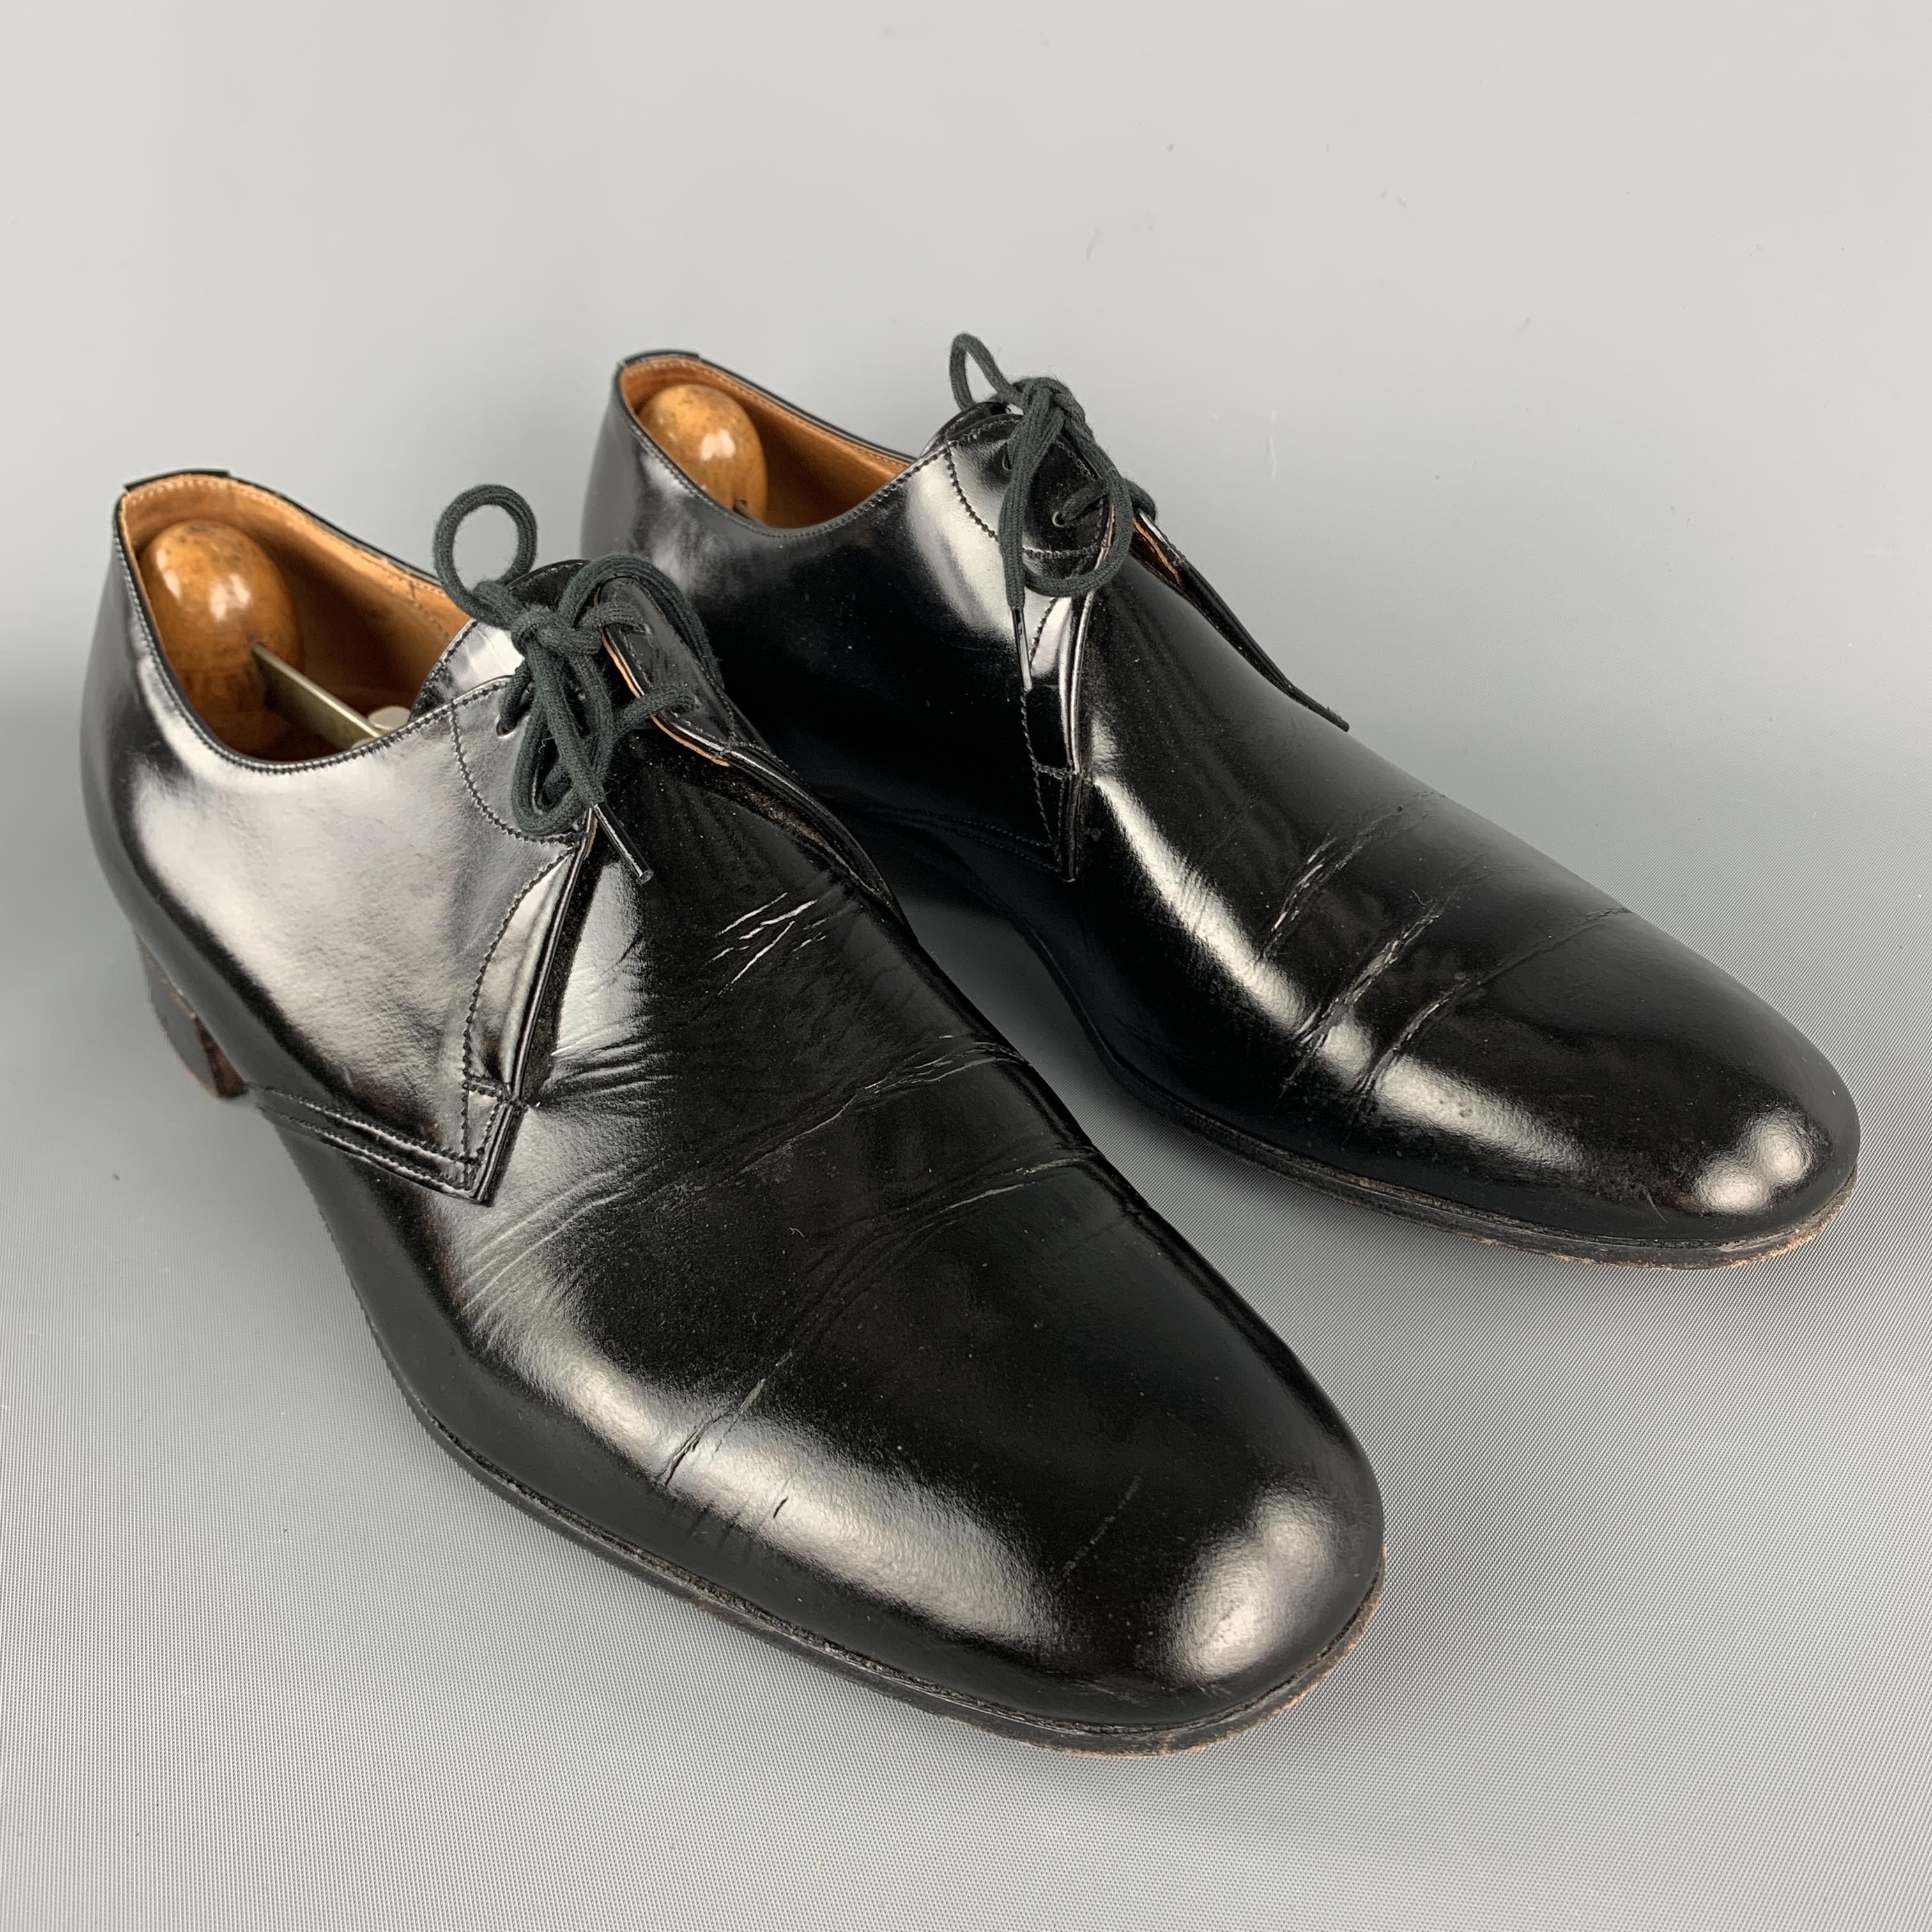 Vintage CHURCH'S Monte Carlo Lace Up Shoes comes in a solid patent black leather material, featuring a leather sole. As is. Made in England.

Excellent Pre-Owned Condition. 
Marked: UK 9D

Outsole: 11 1/4 x 3 3/4 in.